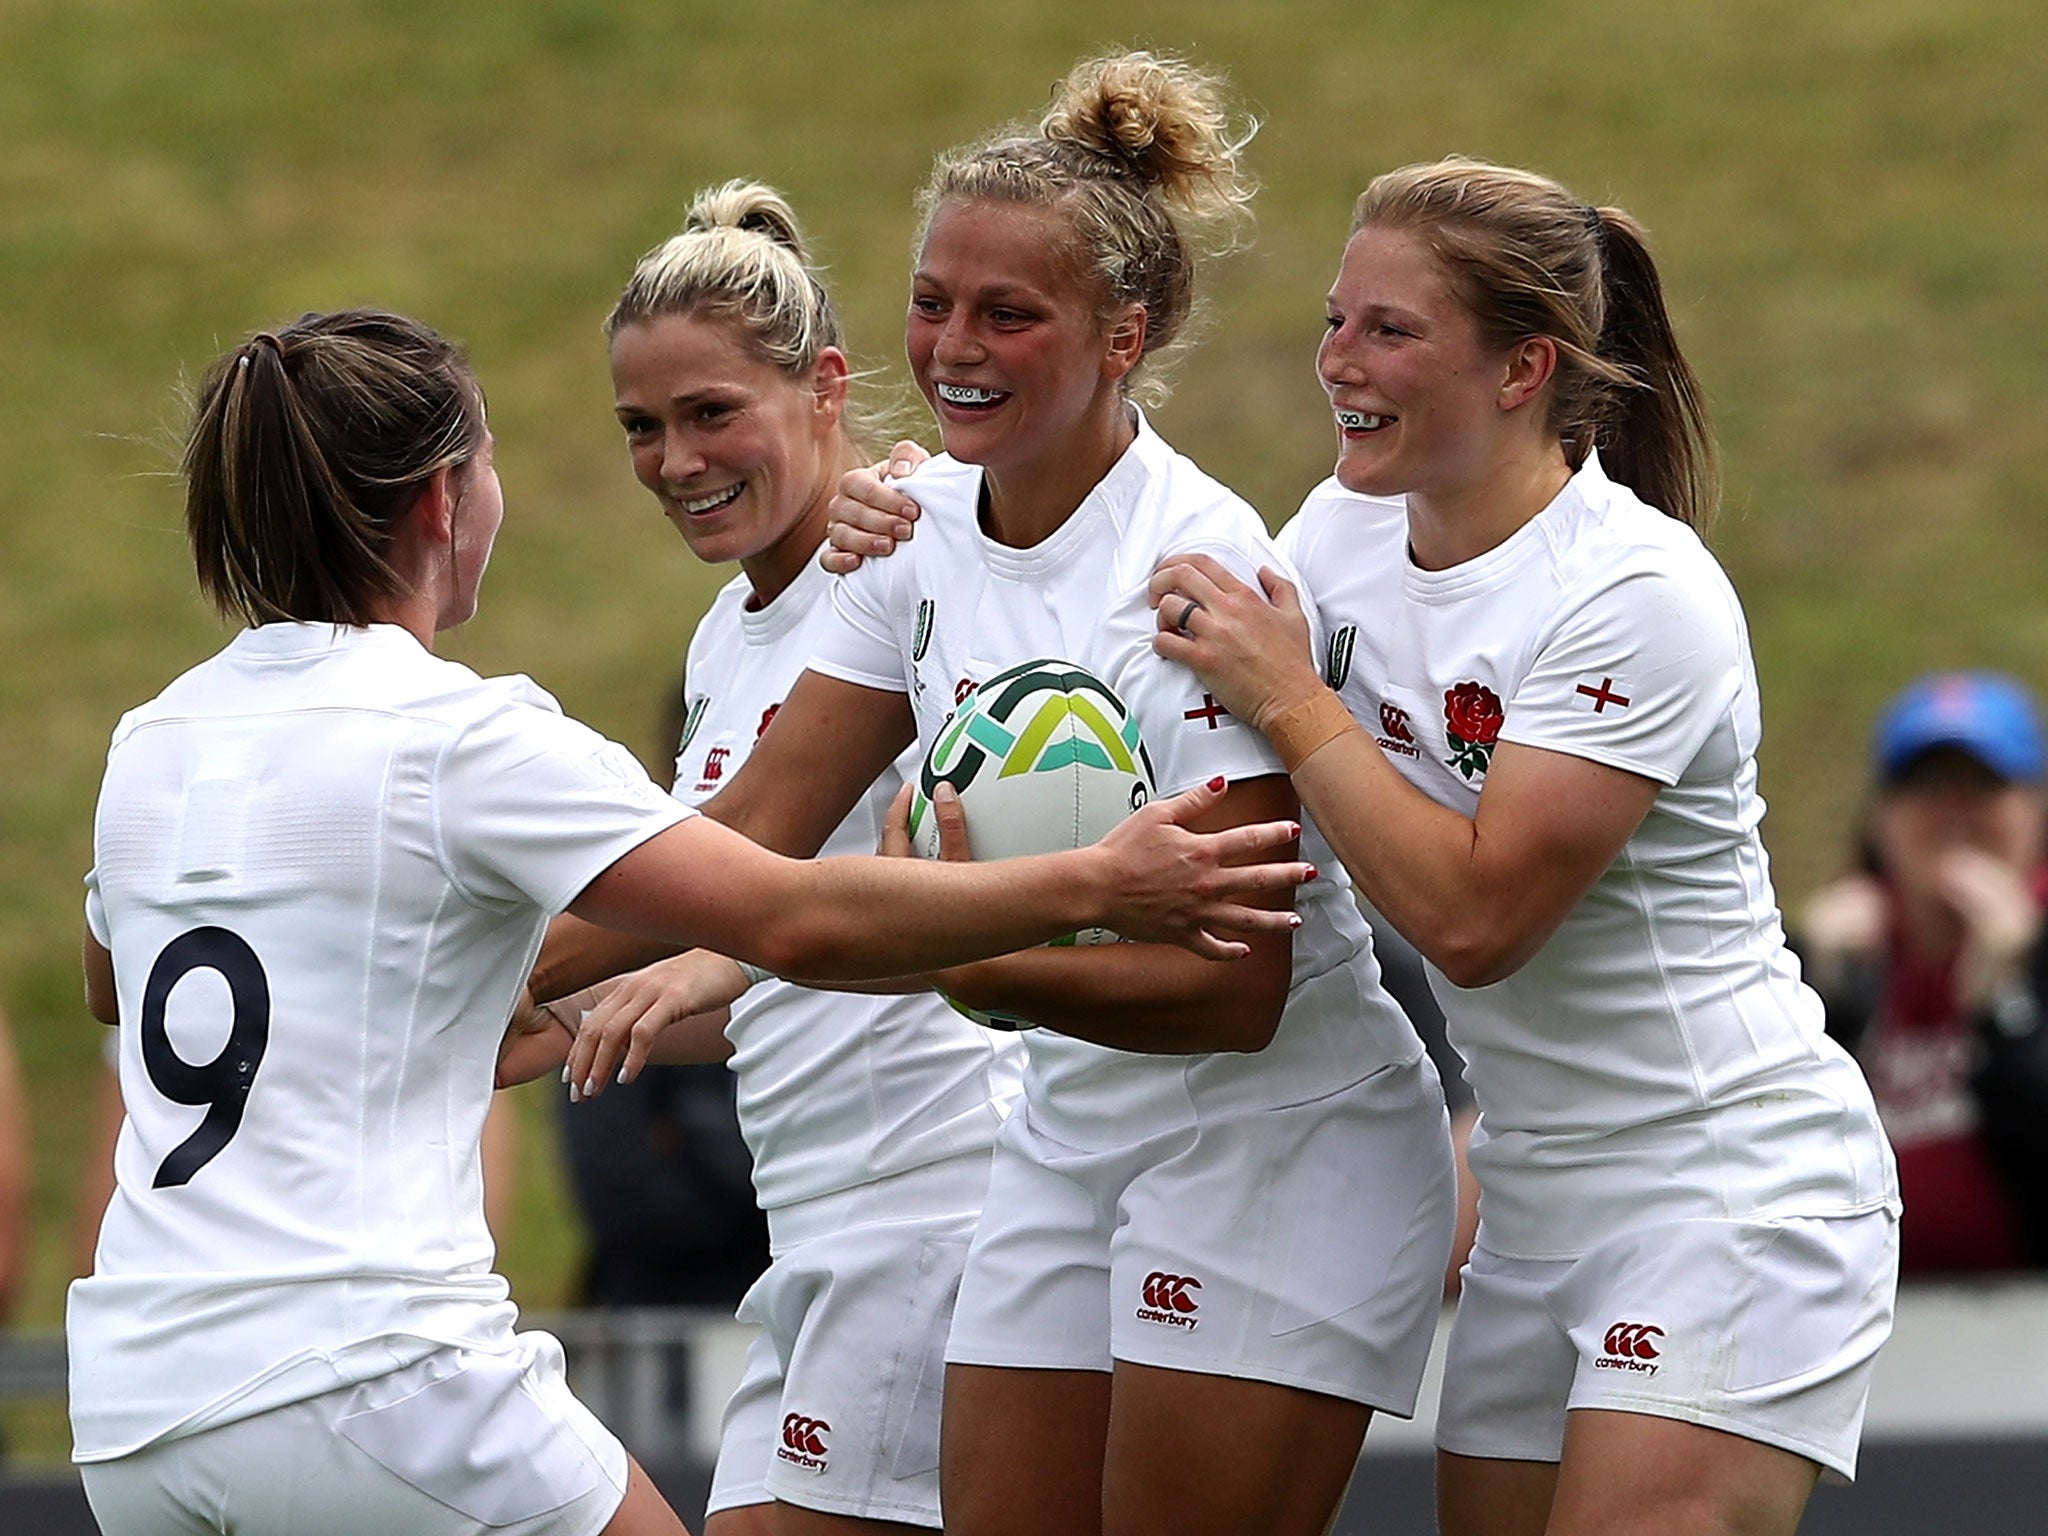 Kay Wilson scored four tries as England thrashed Spain 56-5 to begin their Rugby World Cup defence